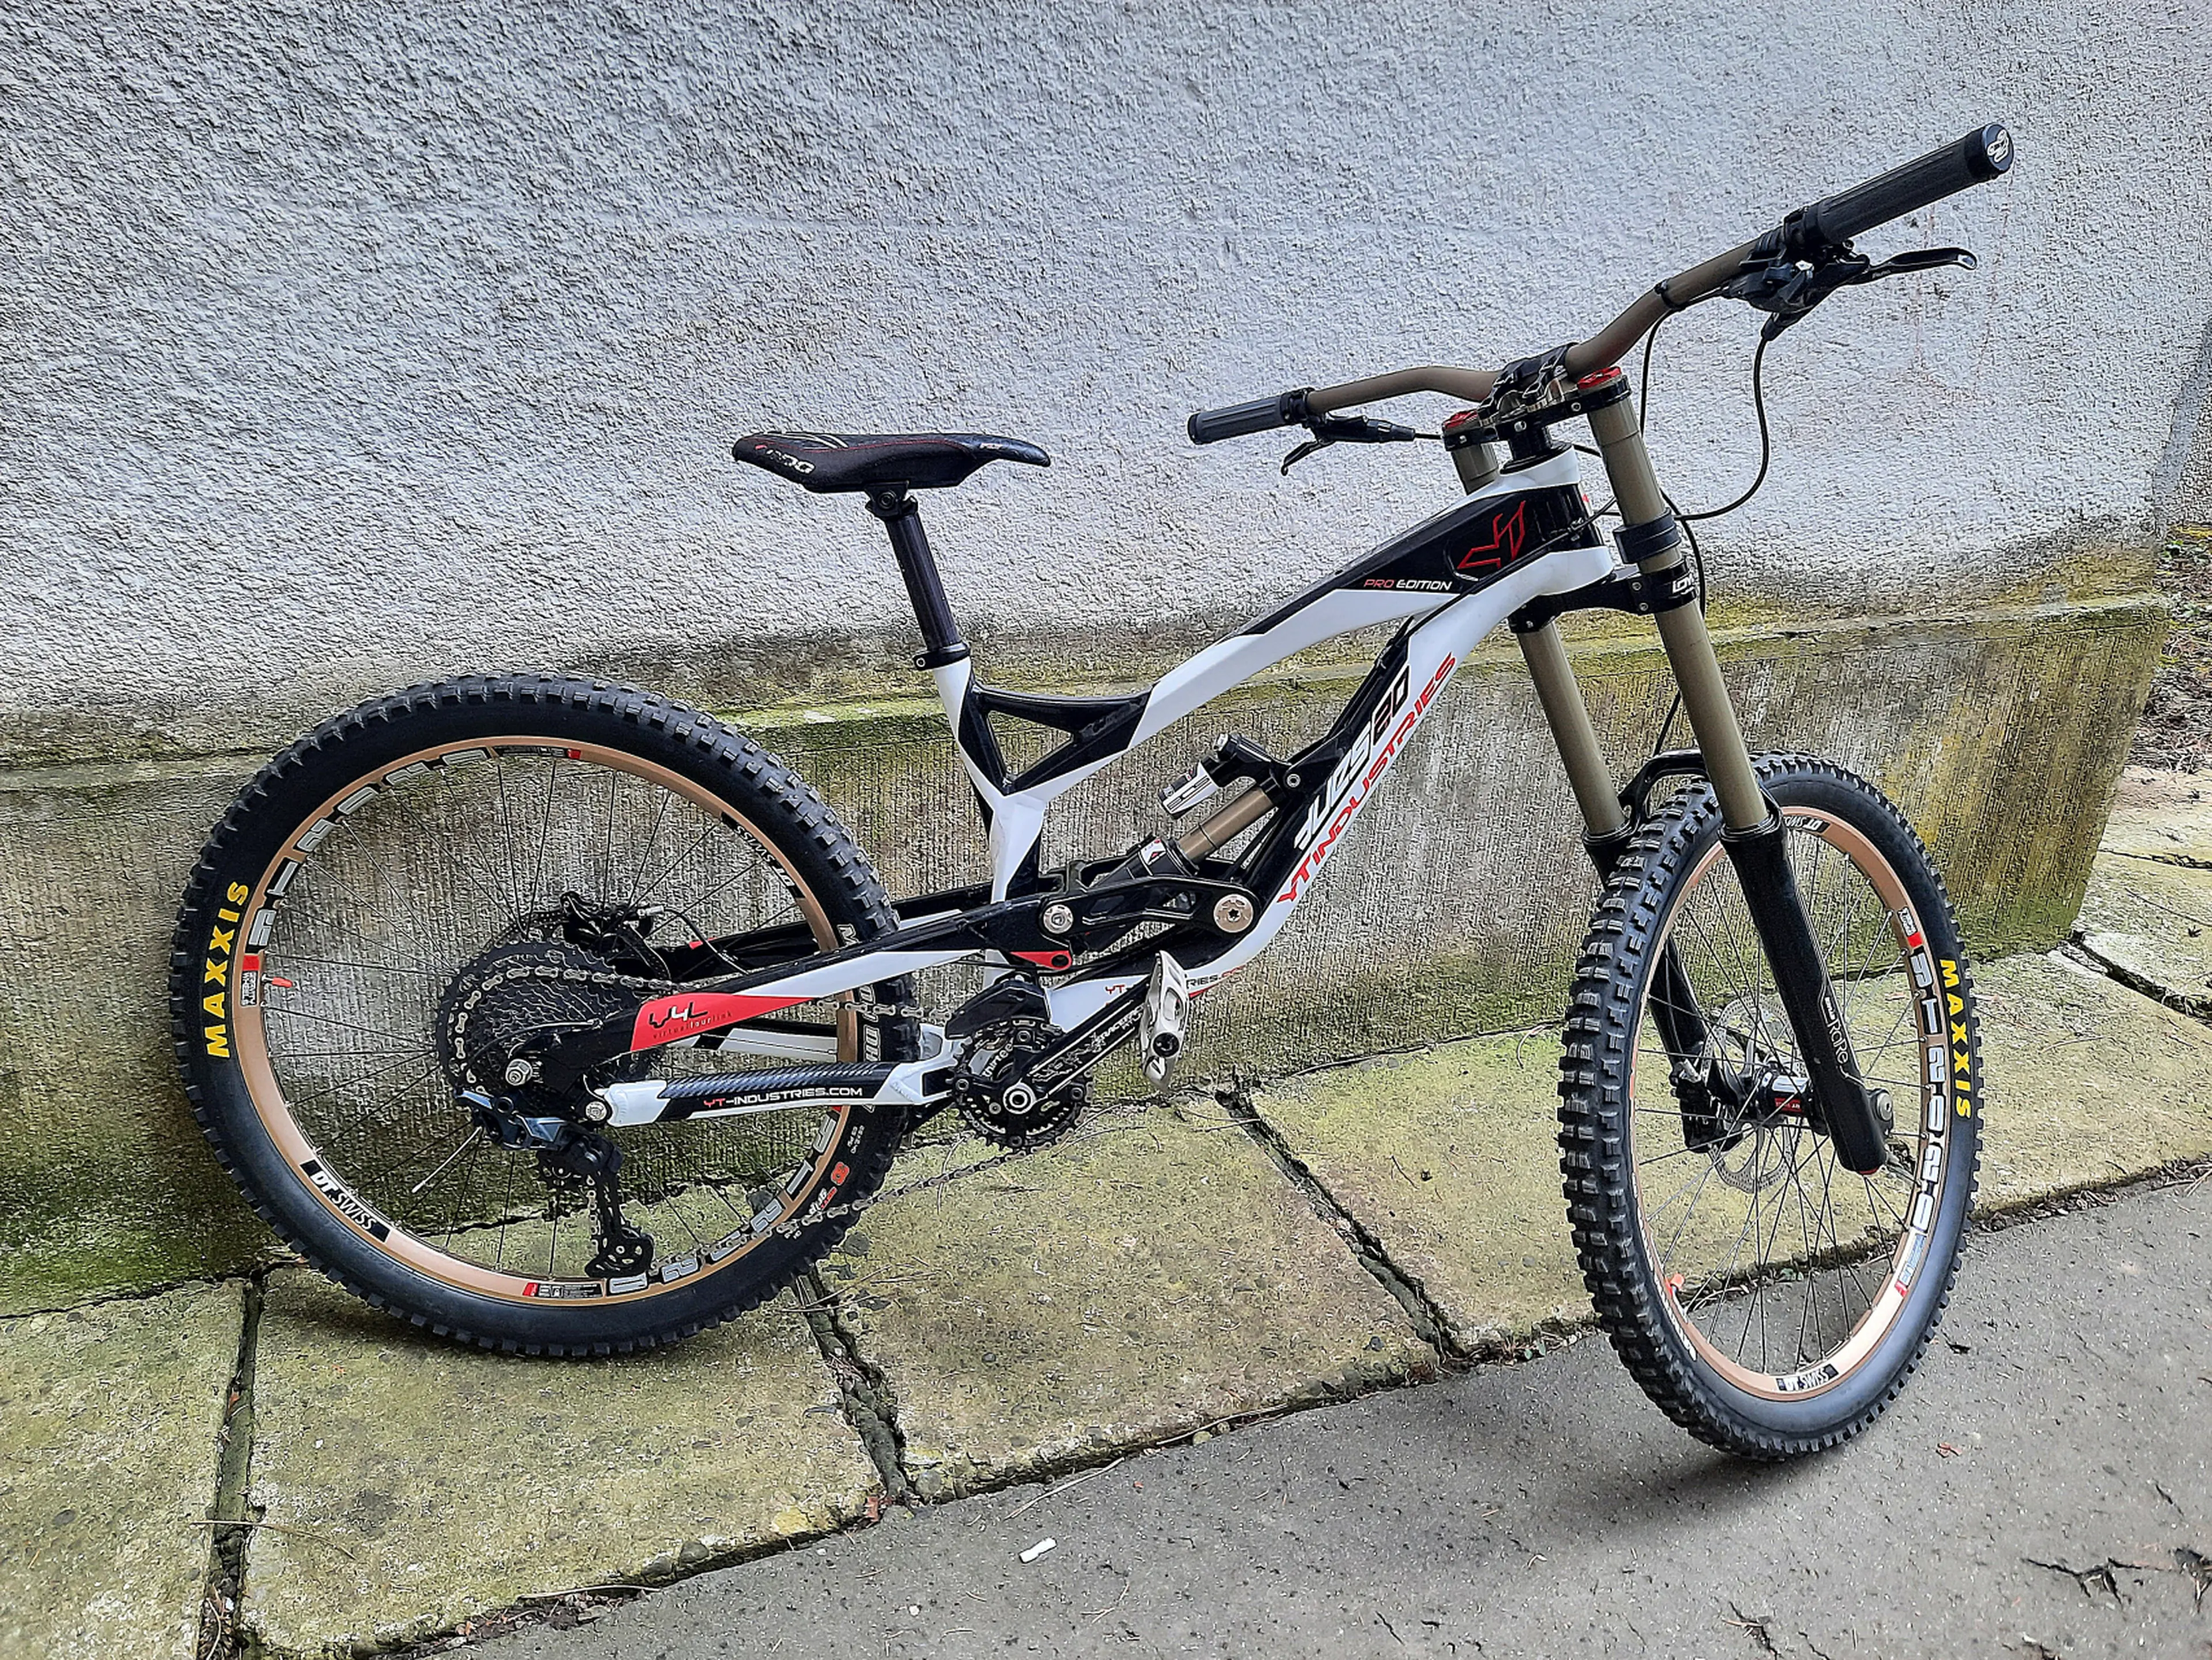 10. YT Industries Pro edition